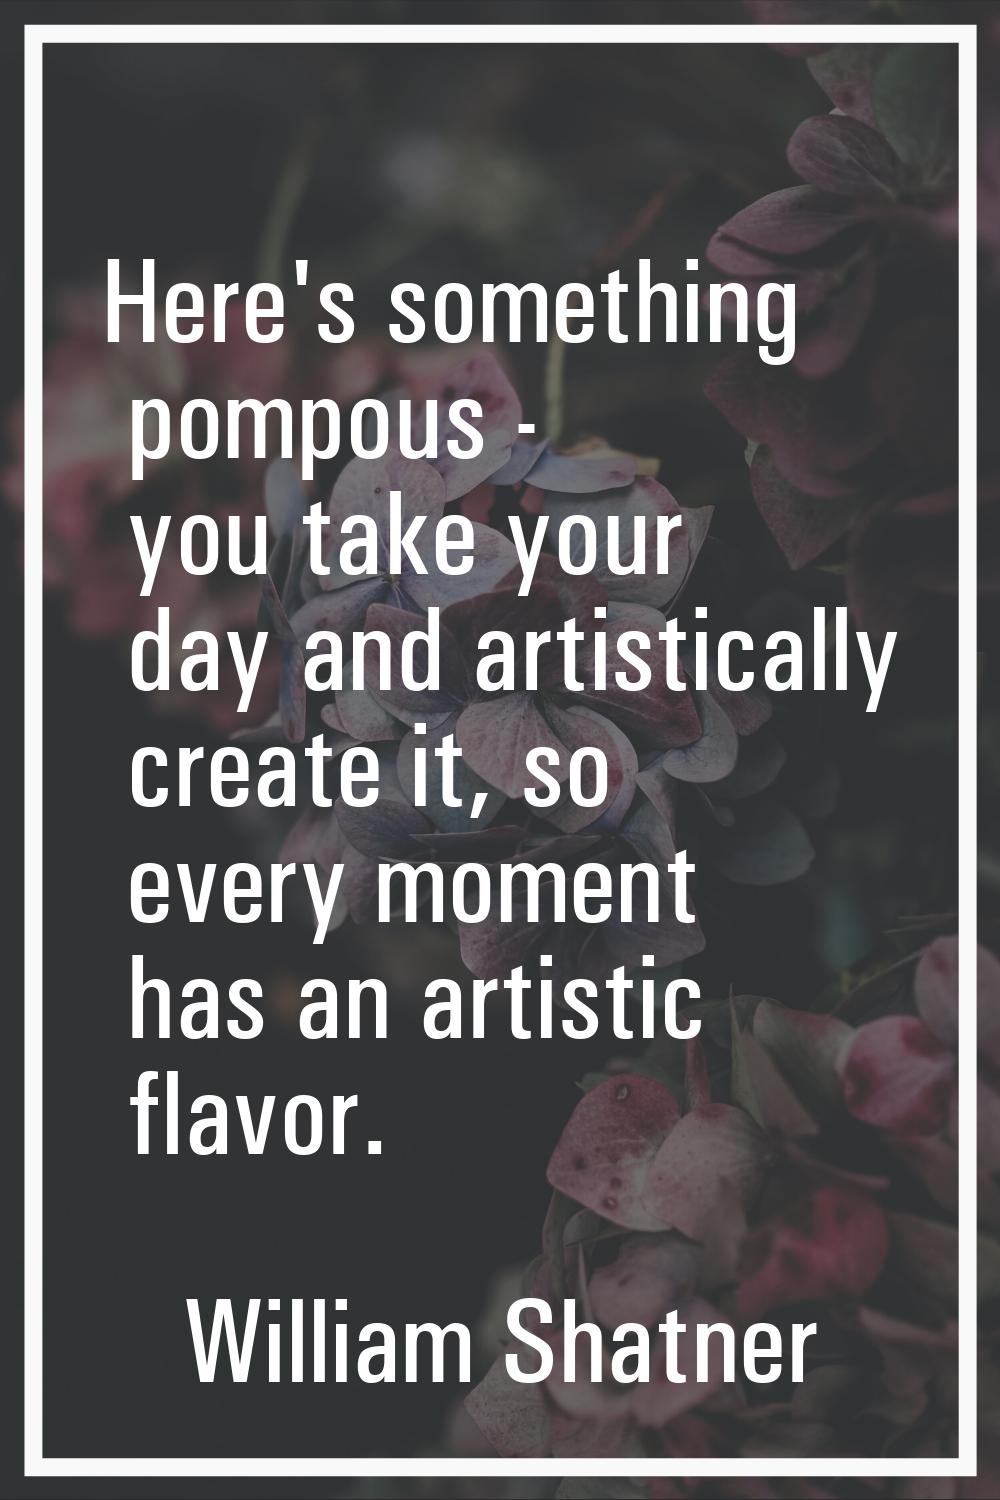 Here's something pompous - you take your day and artistically create it, so every moment has an art